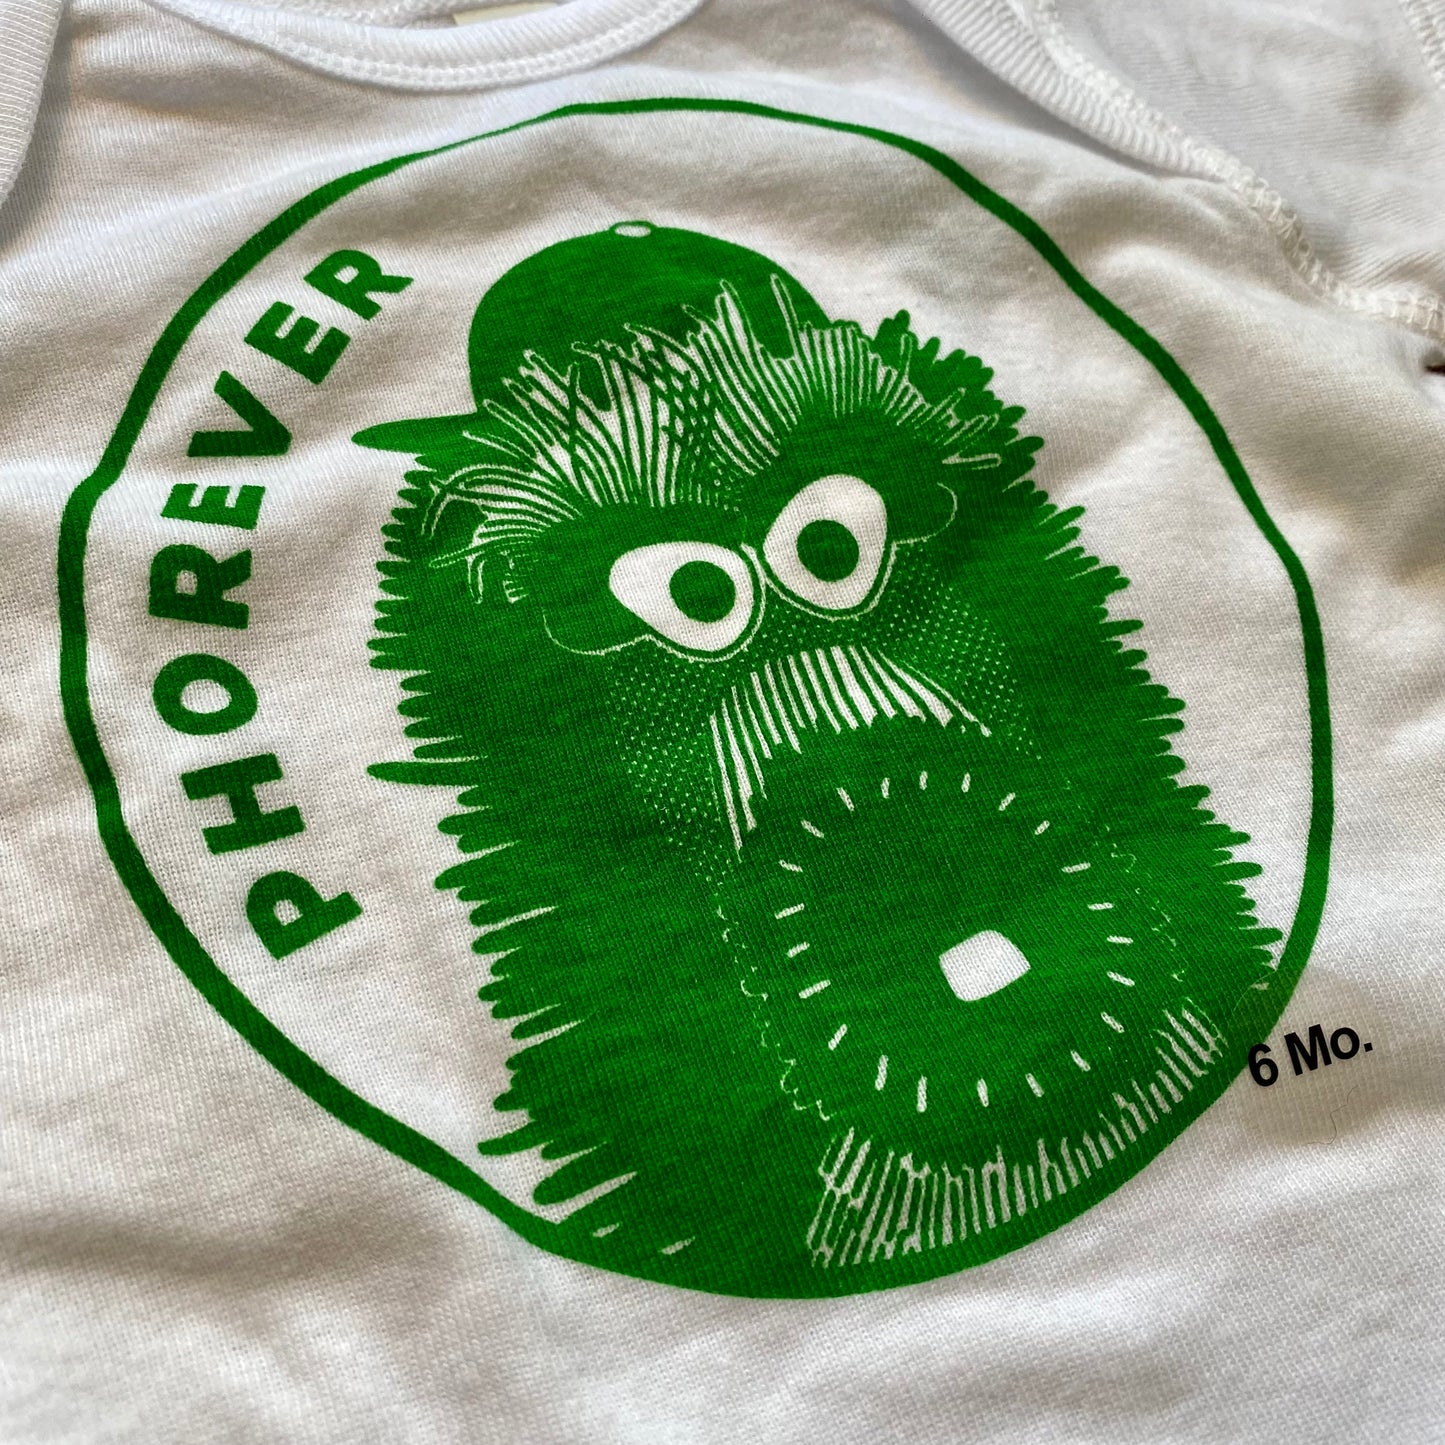 Green cartoonish Phanatic Phorever Baby Onesie with the pun "Phorever Phan" on a baby onesie by exit343design.